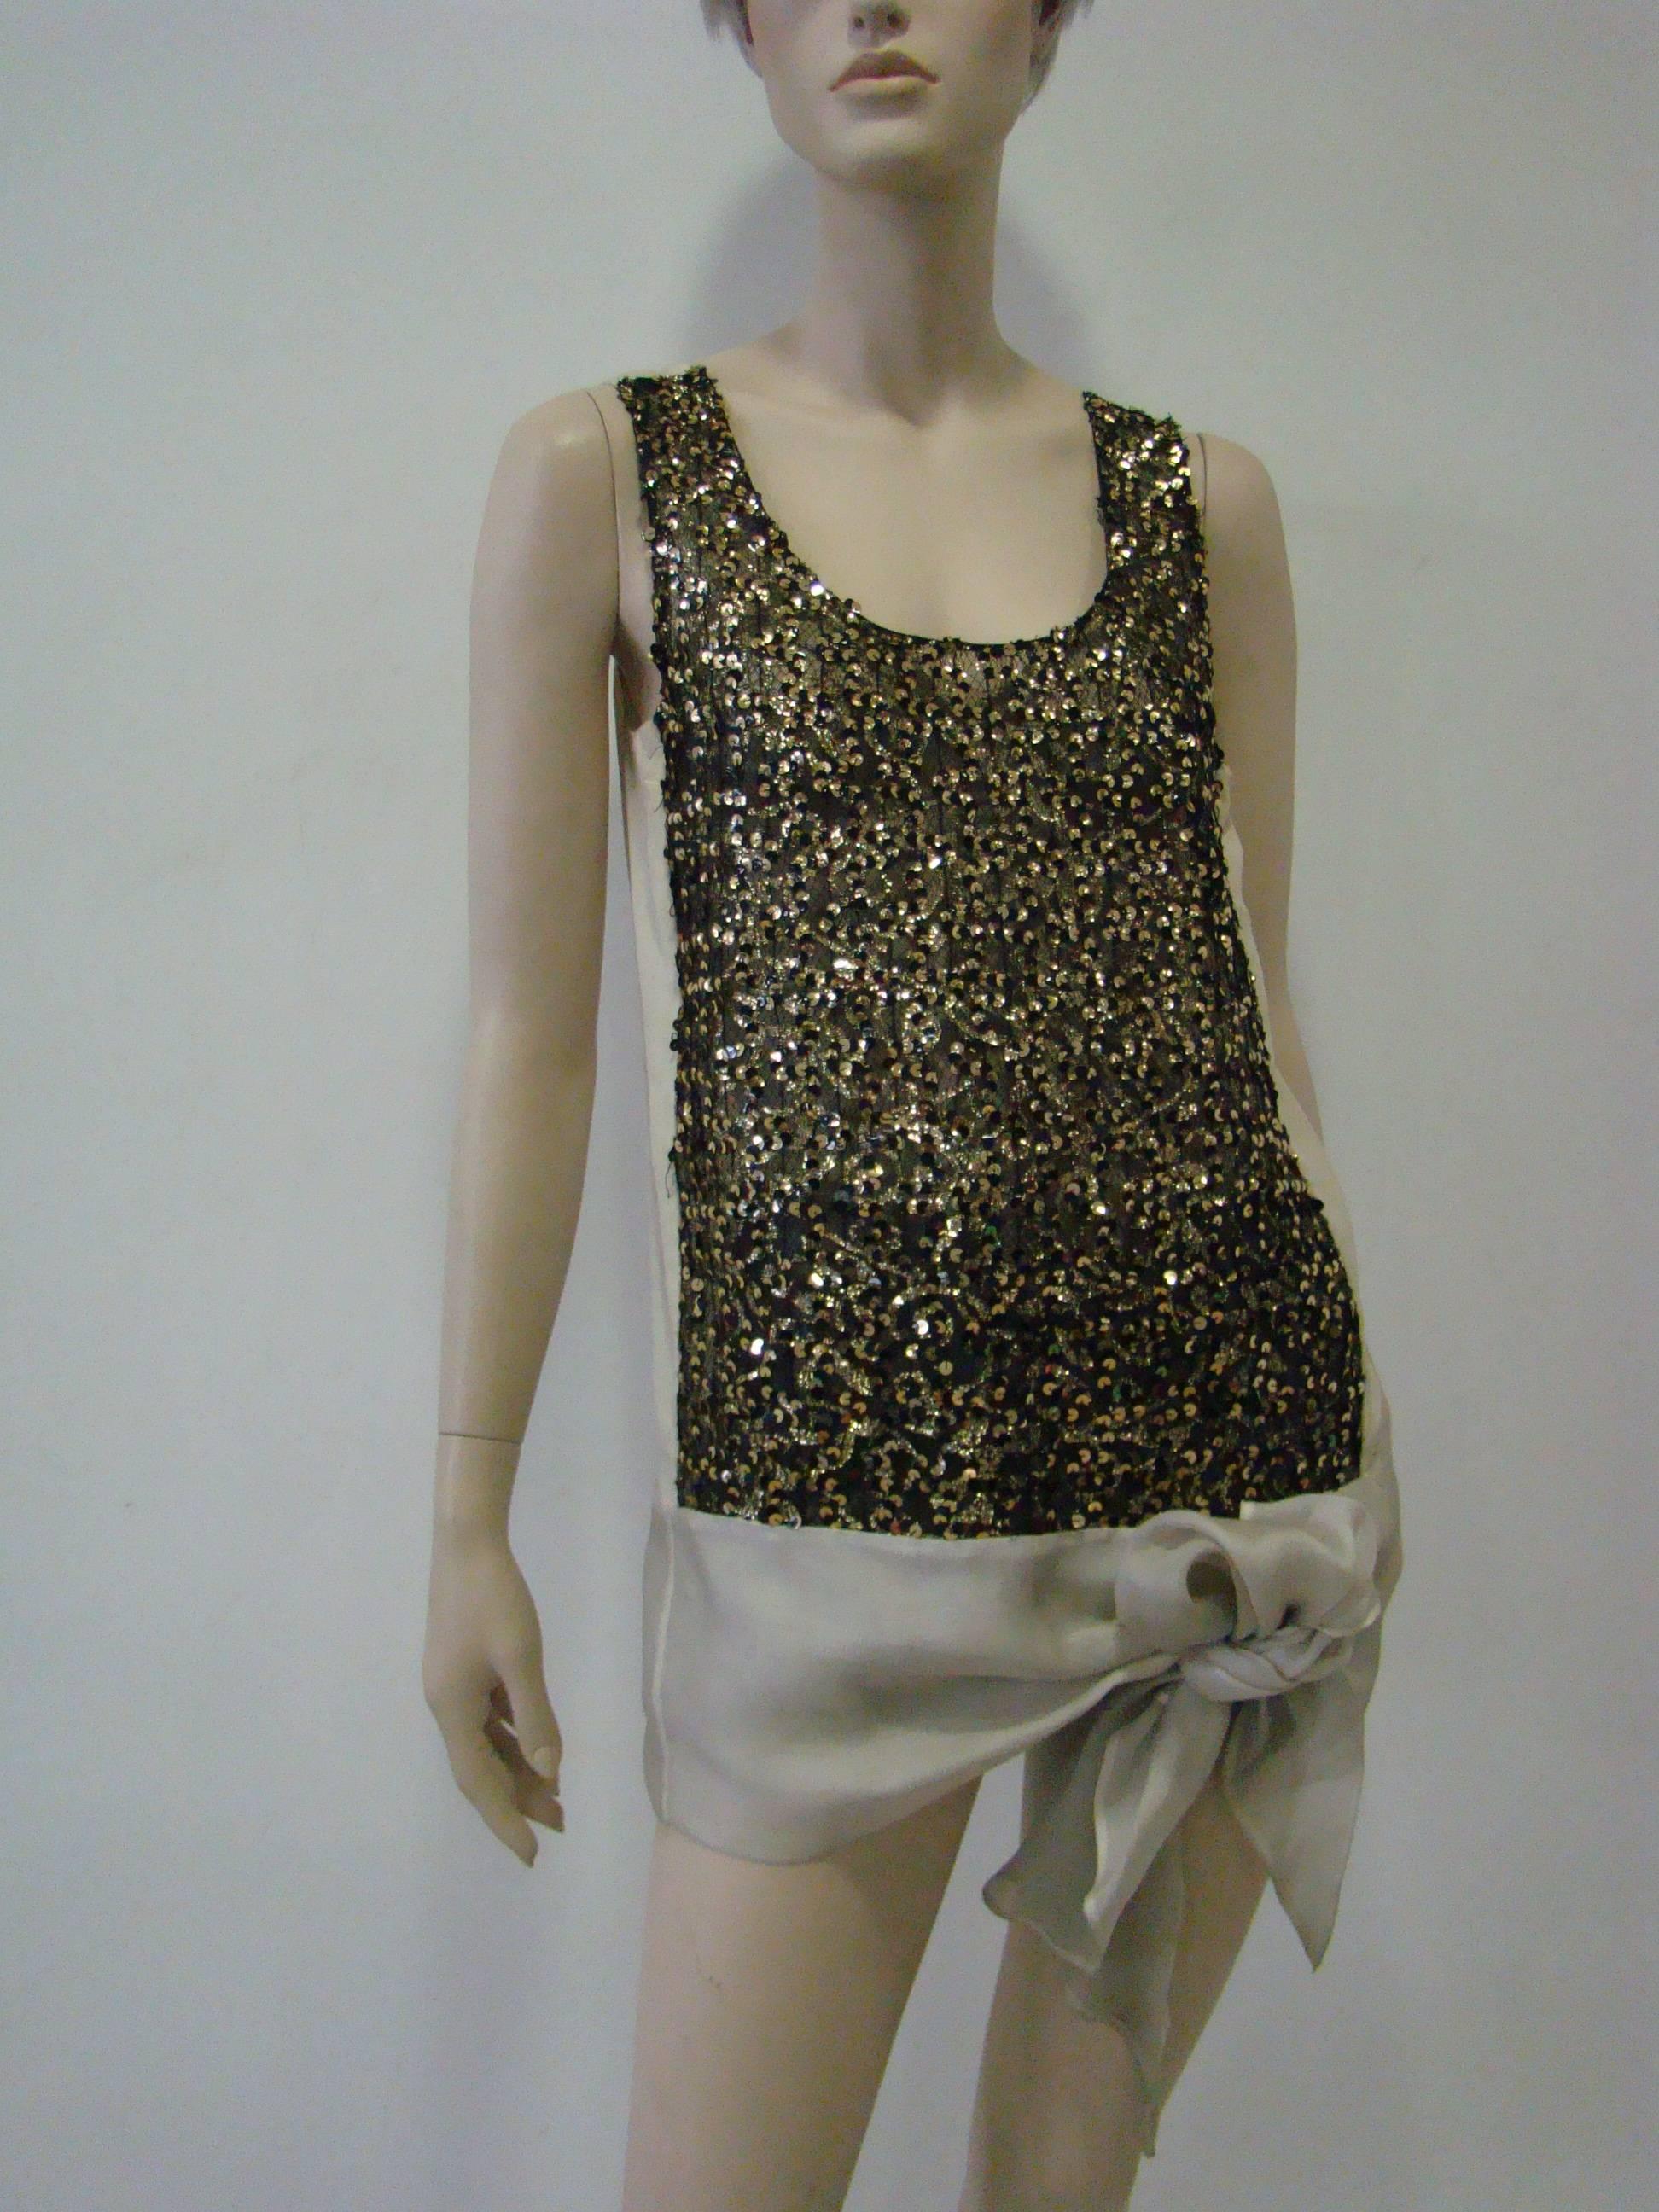 An Amazing Piece From Gianfranco Ferre 1990's. Cut From Featherweight Silk Back And A Gold Lurex Sequin Front, Featuring A Beautiful Wrap Style With A Slit To One Side. Pair This With Leggings And High Heels And Let It Shine.